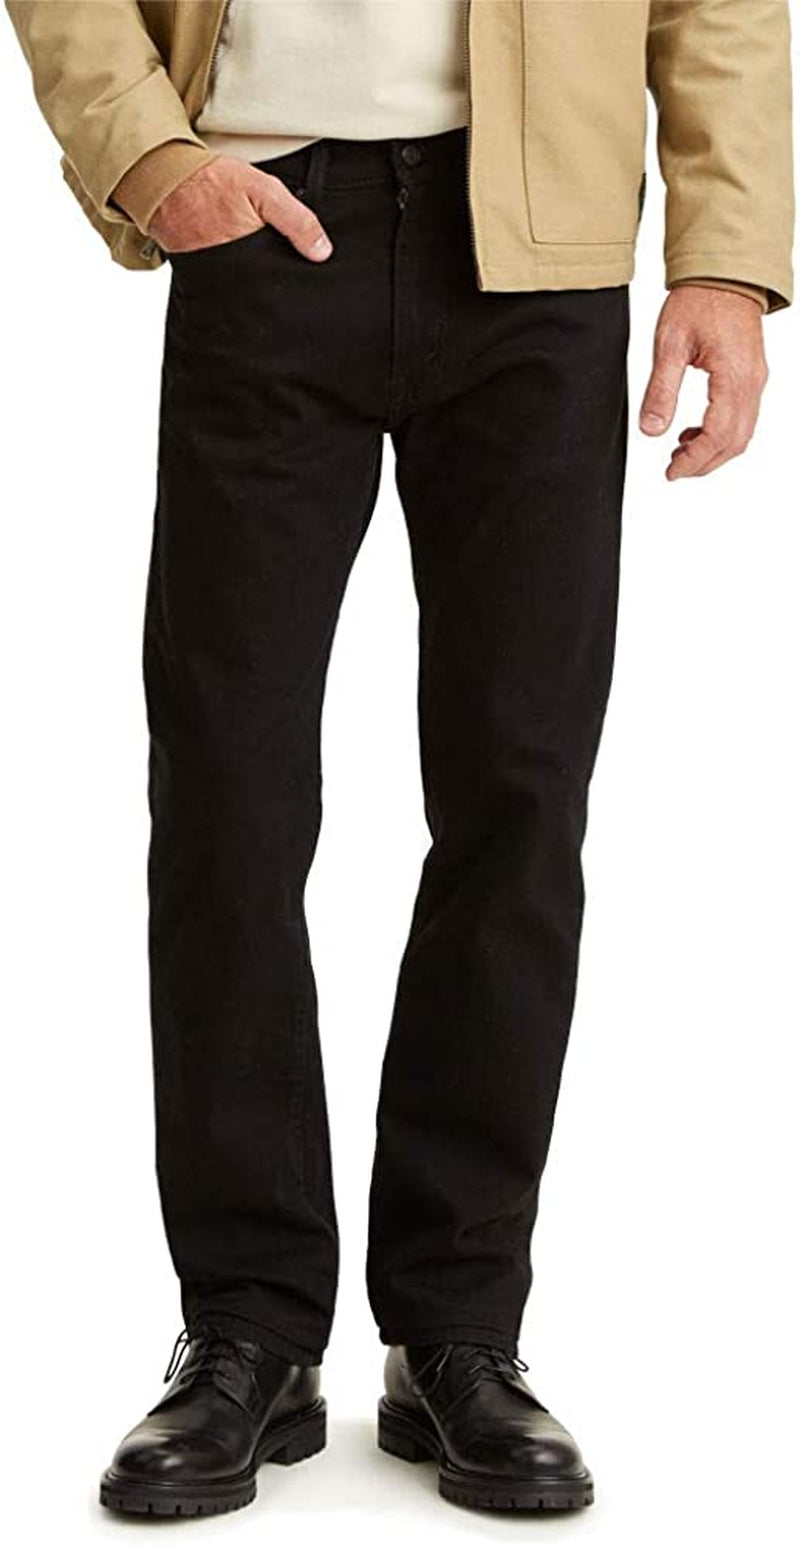 Cotton Levi's jeans in black. Five-pocket styling. Zip-fly. Belt loops at waistband. 